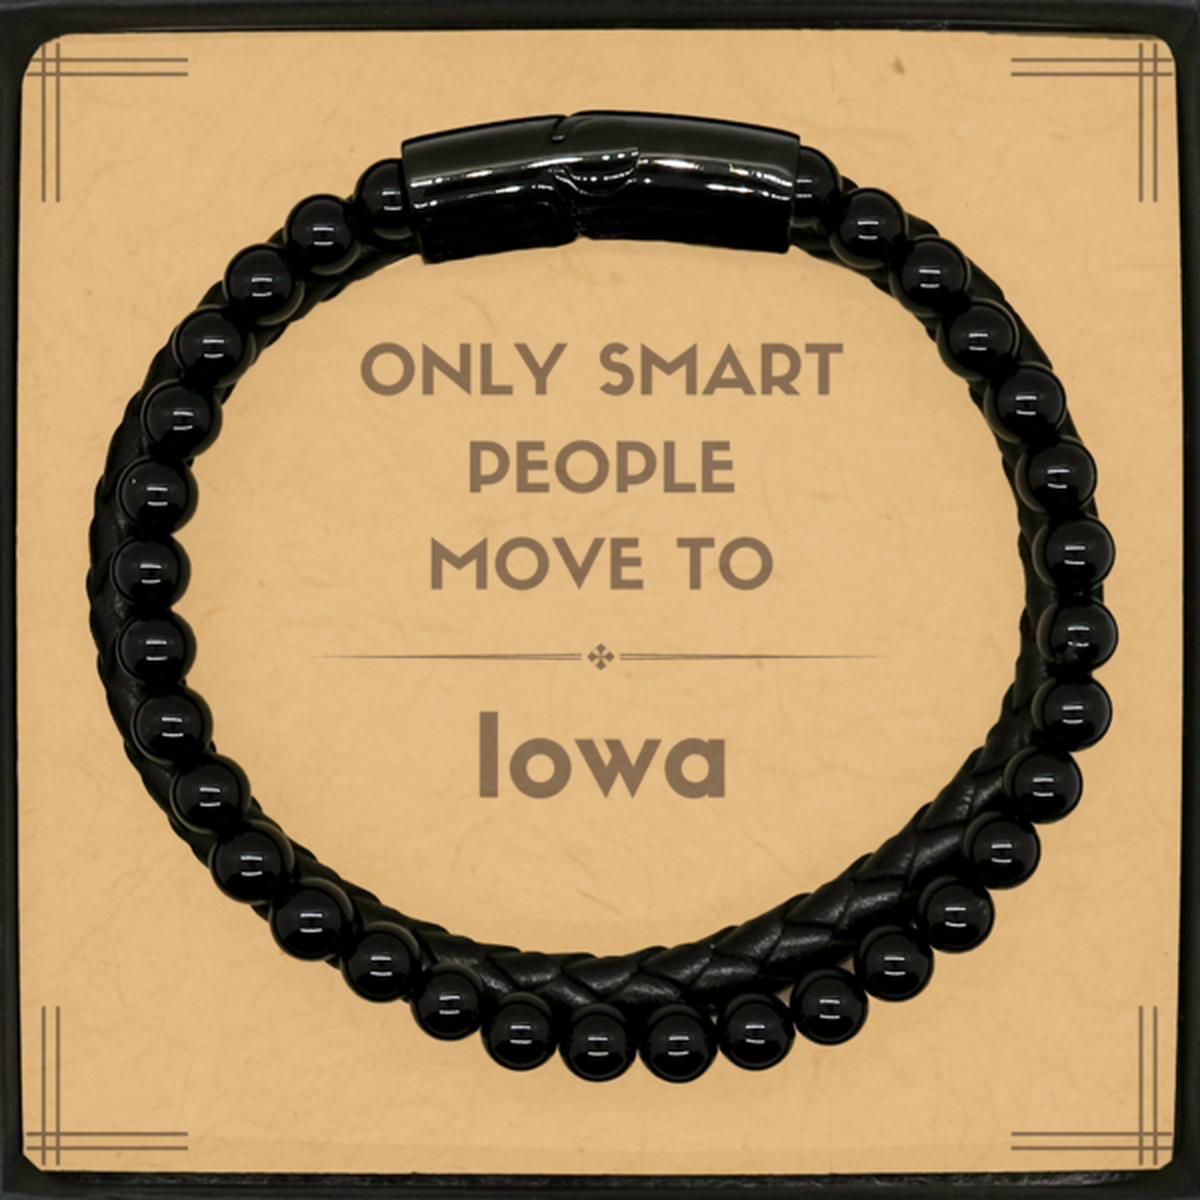 Only smart people move to Iowa Stone Leather Bracelets, Message Card Gifts For Iowa, Move to Iowa Gifts for Friends Coworker Funny Saying Quote